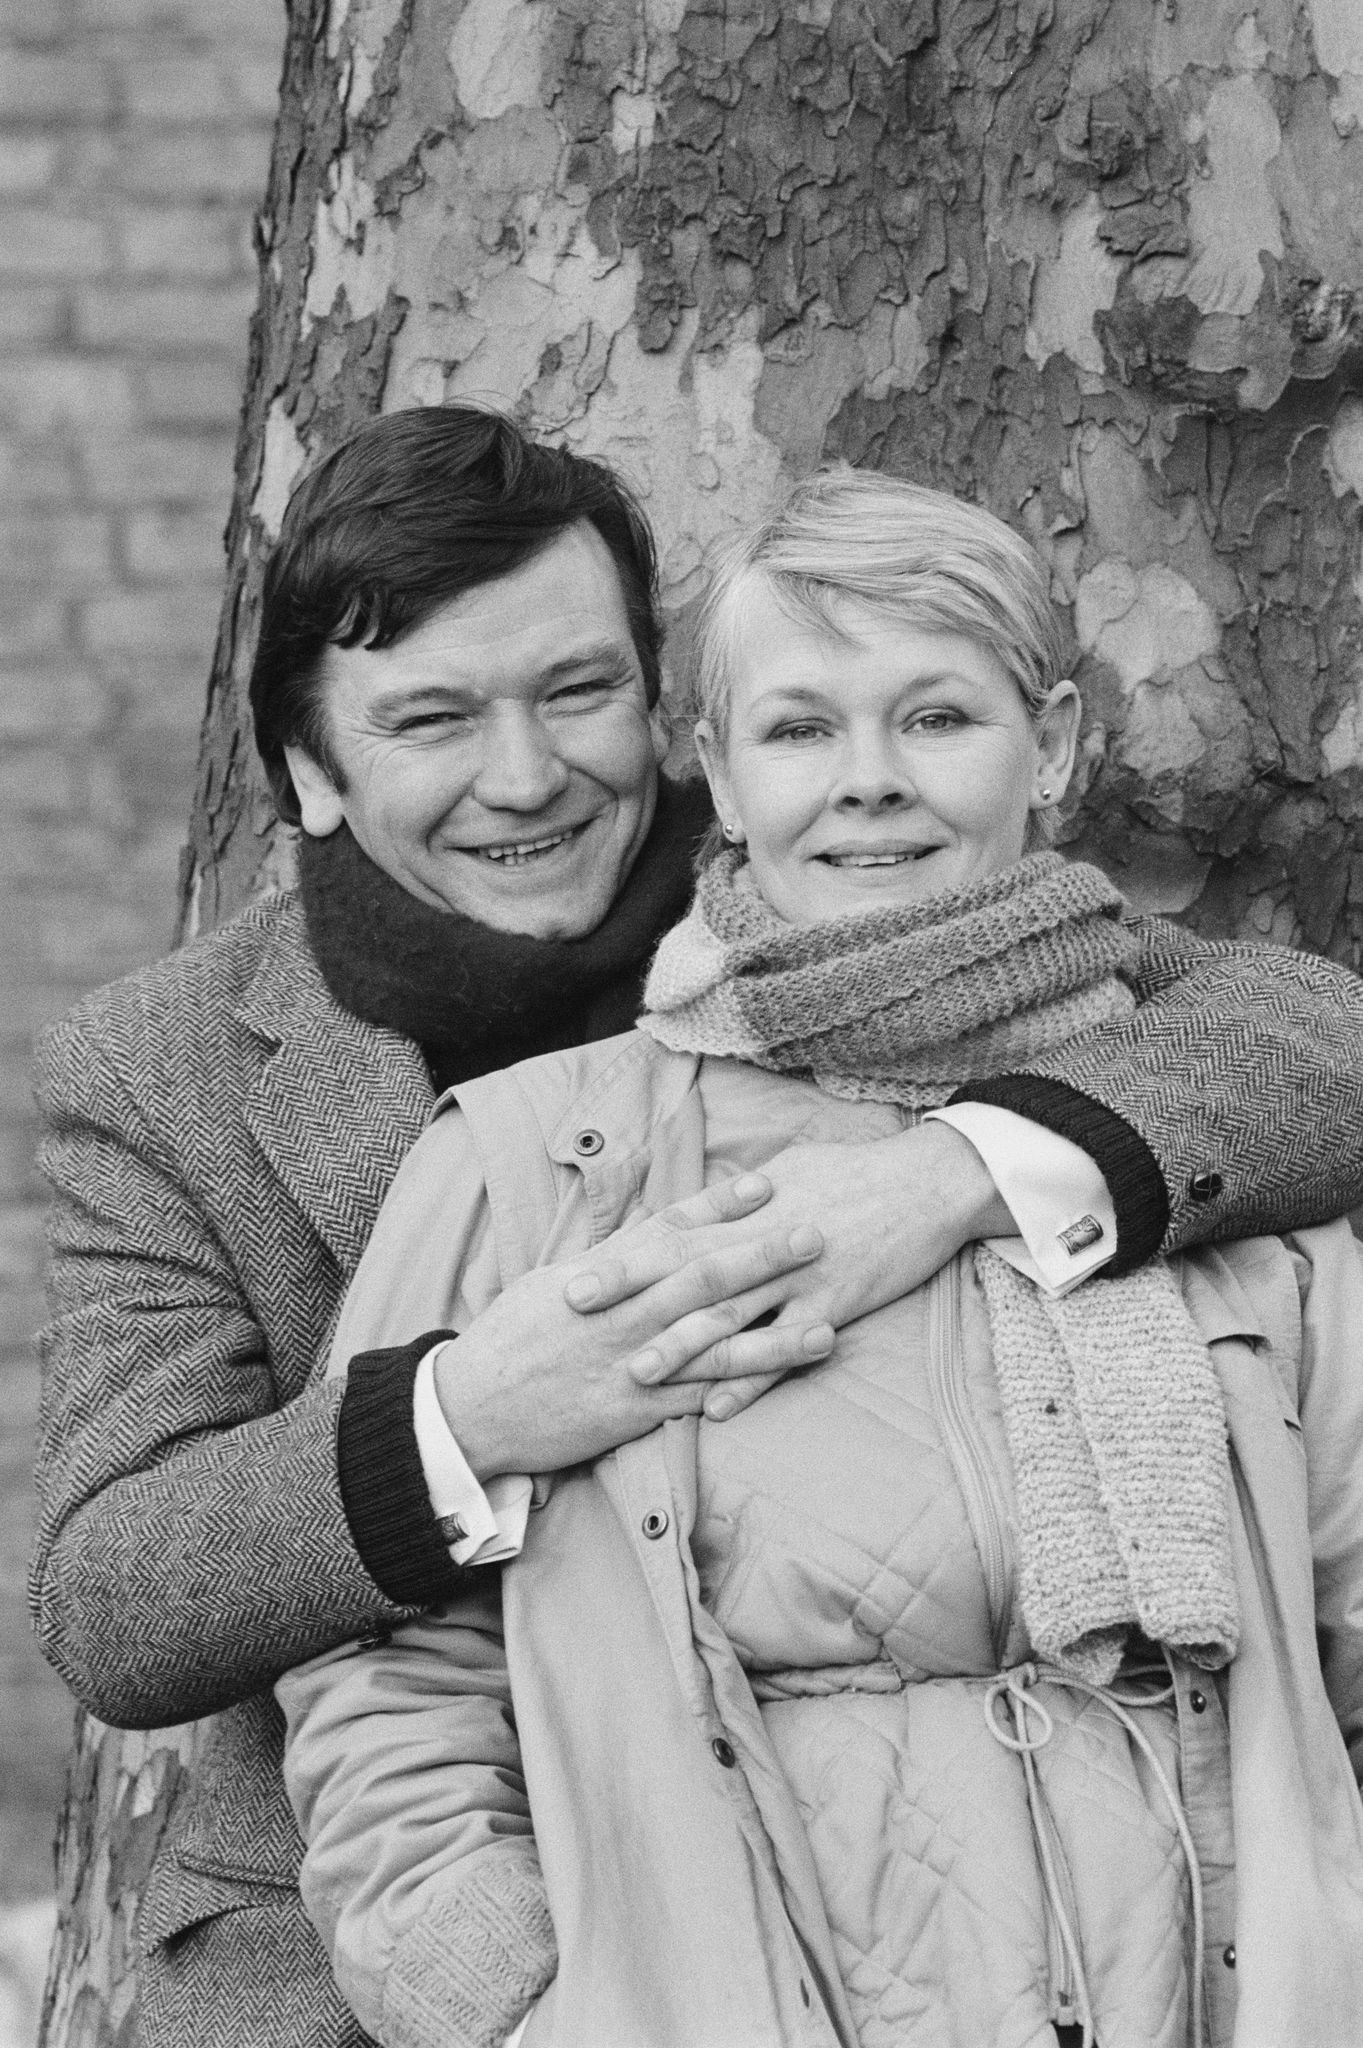 Judi Dench and Michael Williams in the television sitcom "A Fine Romance" in 1983 in London, England | Photo: Getty Images